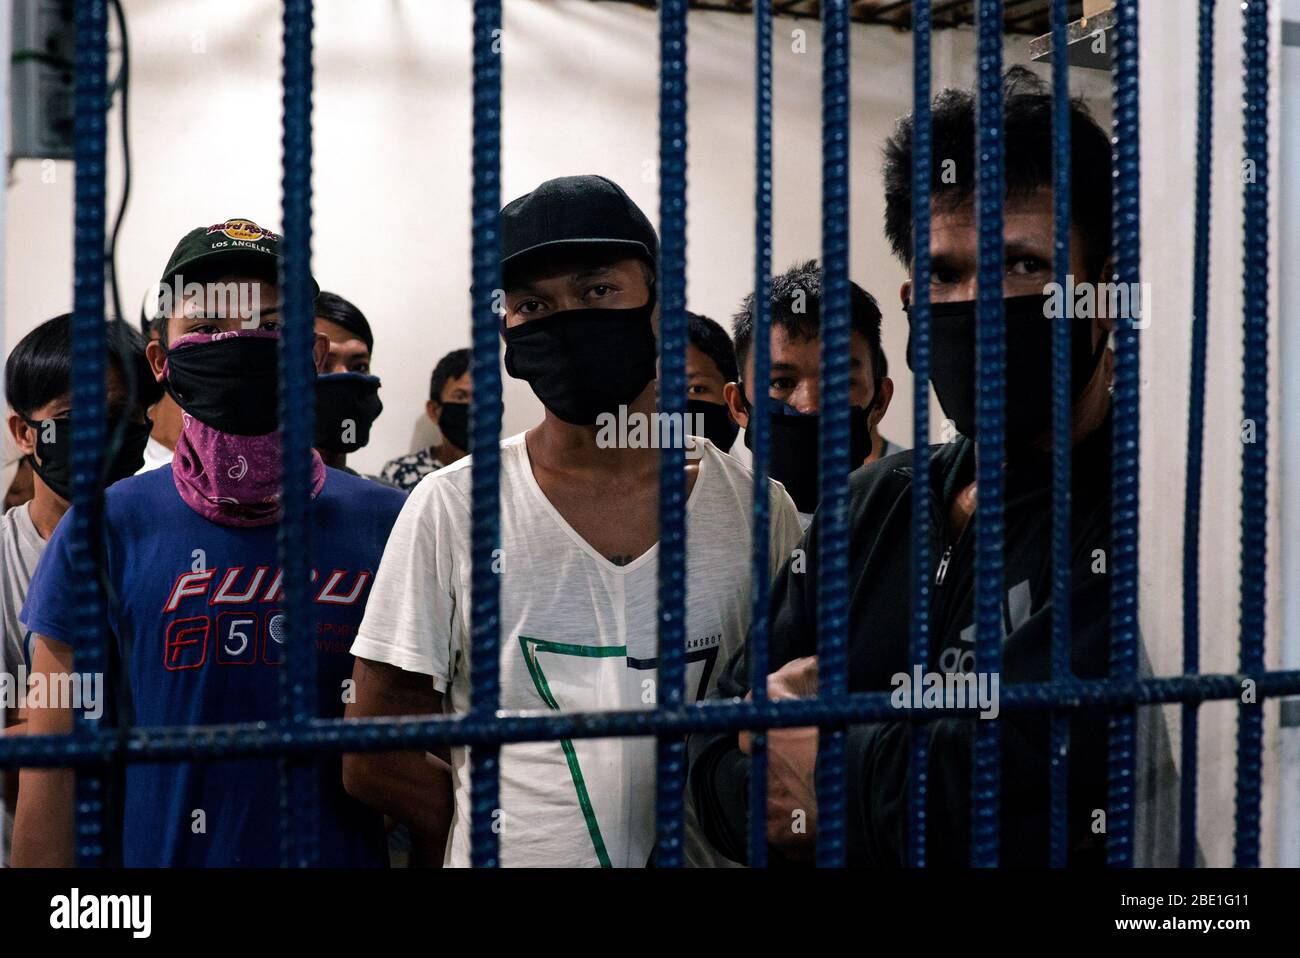 April 6, 2020 - Manila, National Captiol Region, Philippines - Detainees from Sitio San Roque, Quezon City await to be released on bail from Camp Karingal's detention center on April 6, 2020. Twenty-one residents were arrested for illegal assembly during an emergency health crisis during the enhanced community quarantine in Metro Manila to fight spread of COVID-19. On April 1, 2020, residents of Sitio San Roque gathered together to protest failings of the Duterte administration and local government to provide sufficient relief goods to their community. After a 15-minute warning, the Quezon Cit Stock Photo